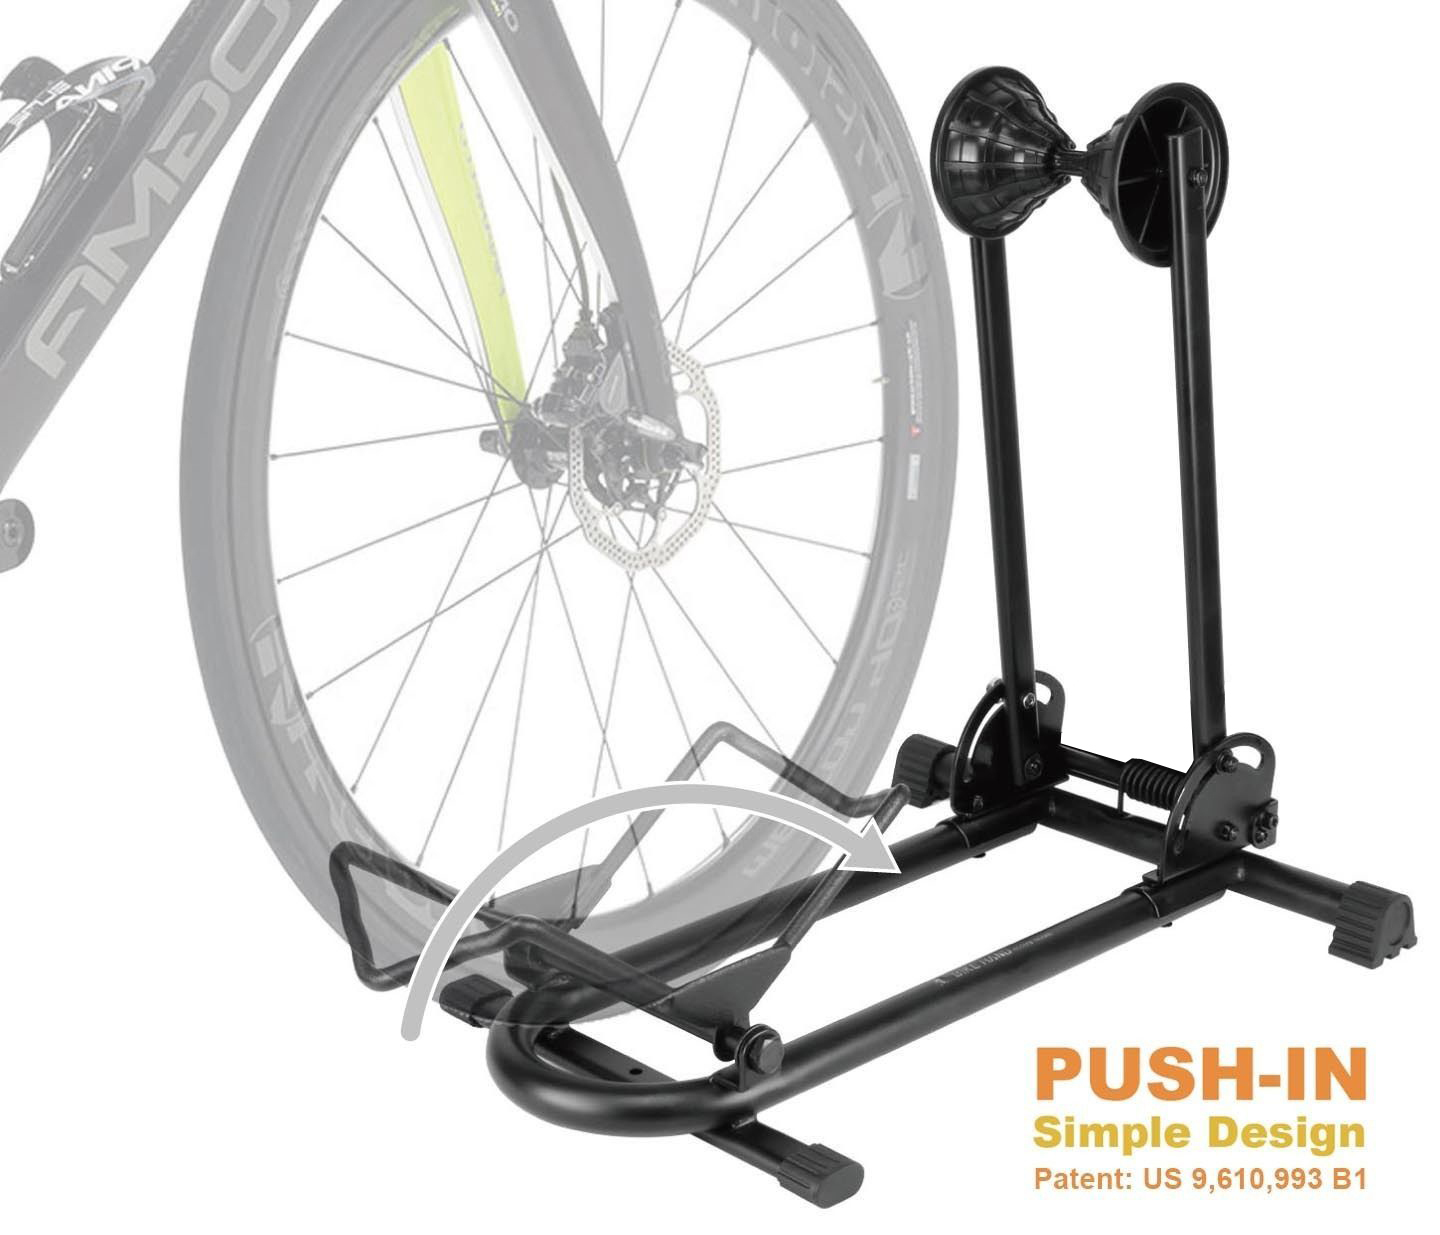 stand for push bike